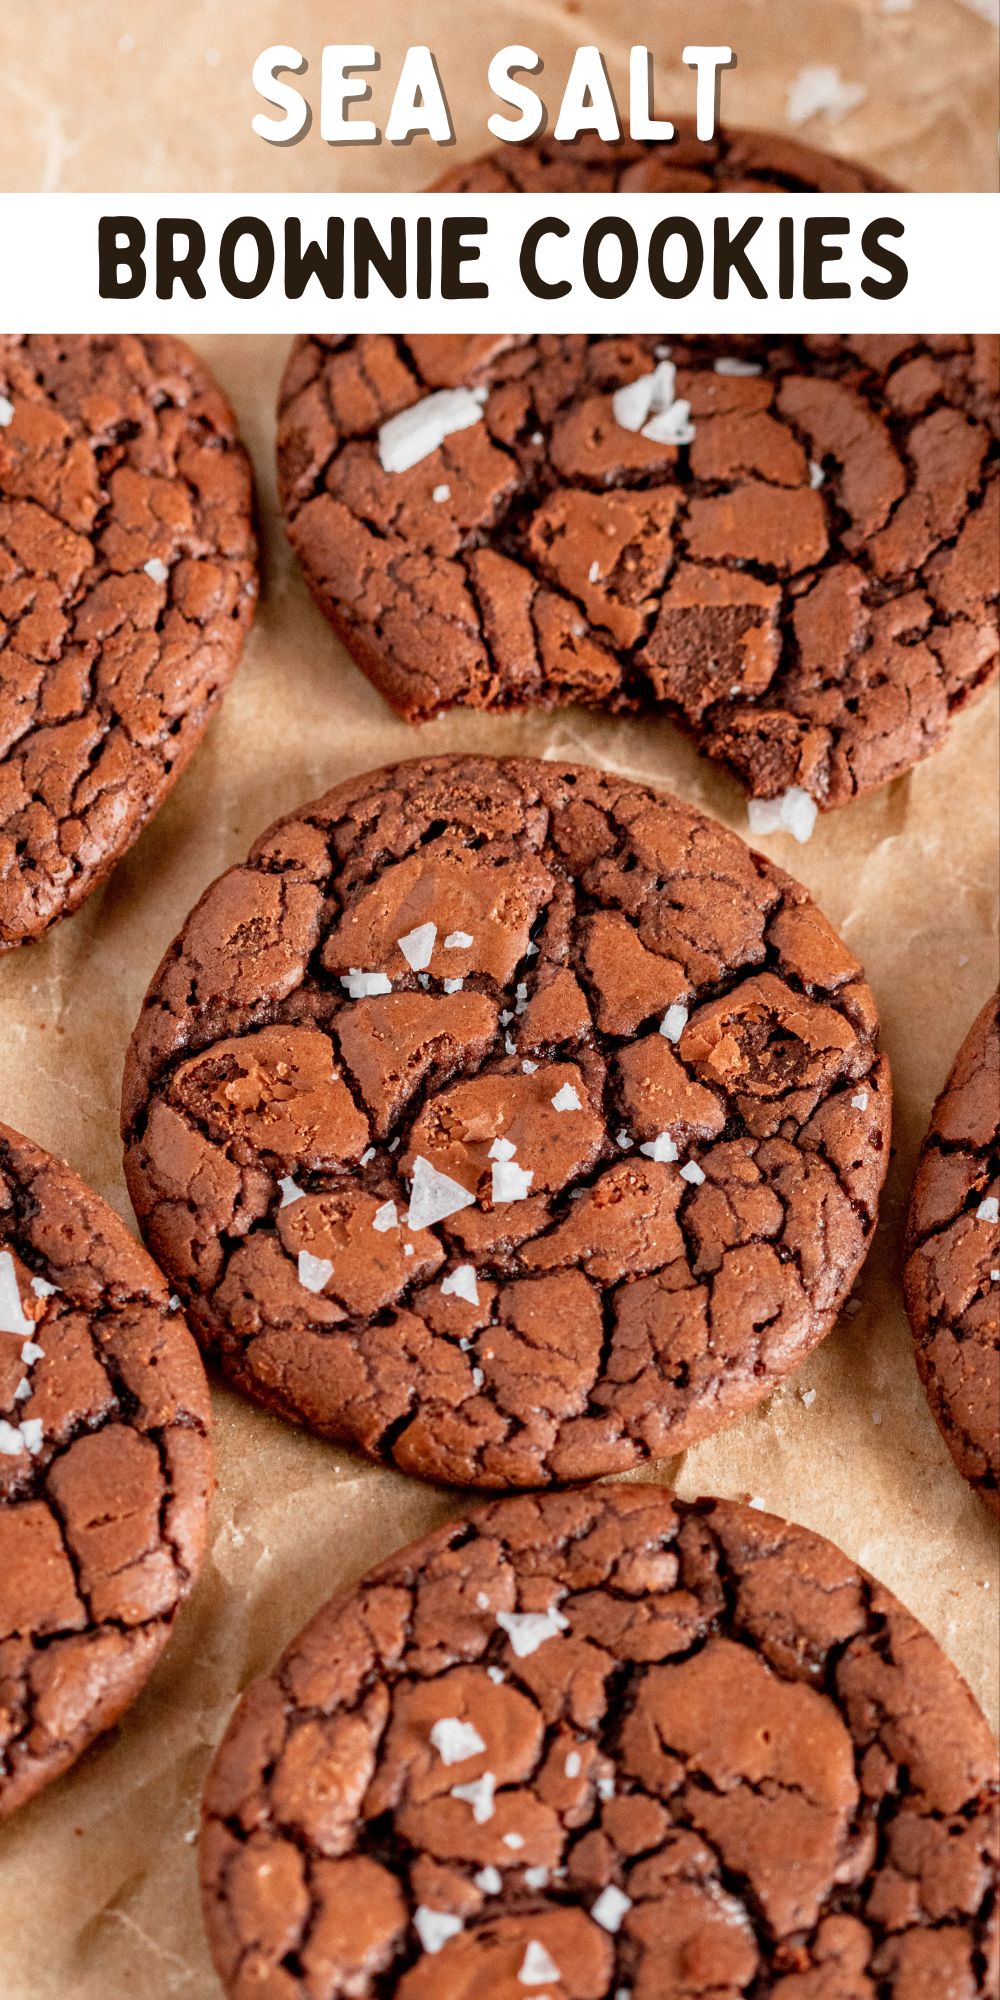 Brownies in cookie form? These Sea Salt Brownie Cookies are decadently rich and chocolatey, chewy inside while crispy on the outside. via @familyfresh